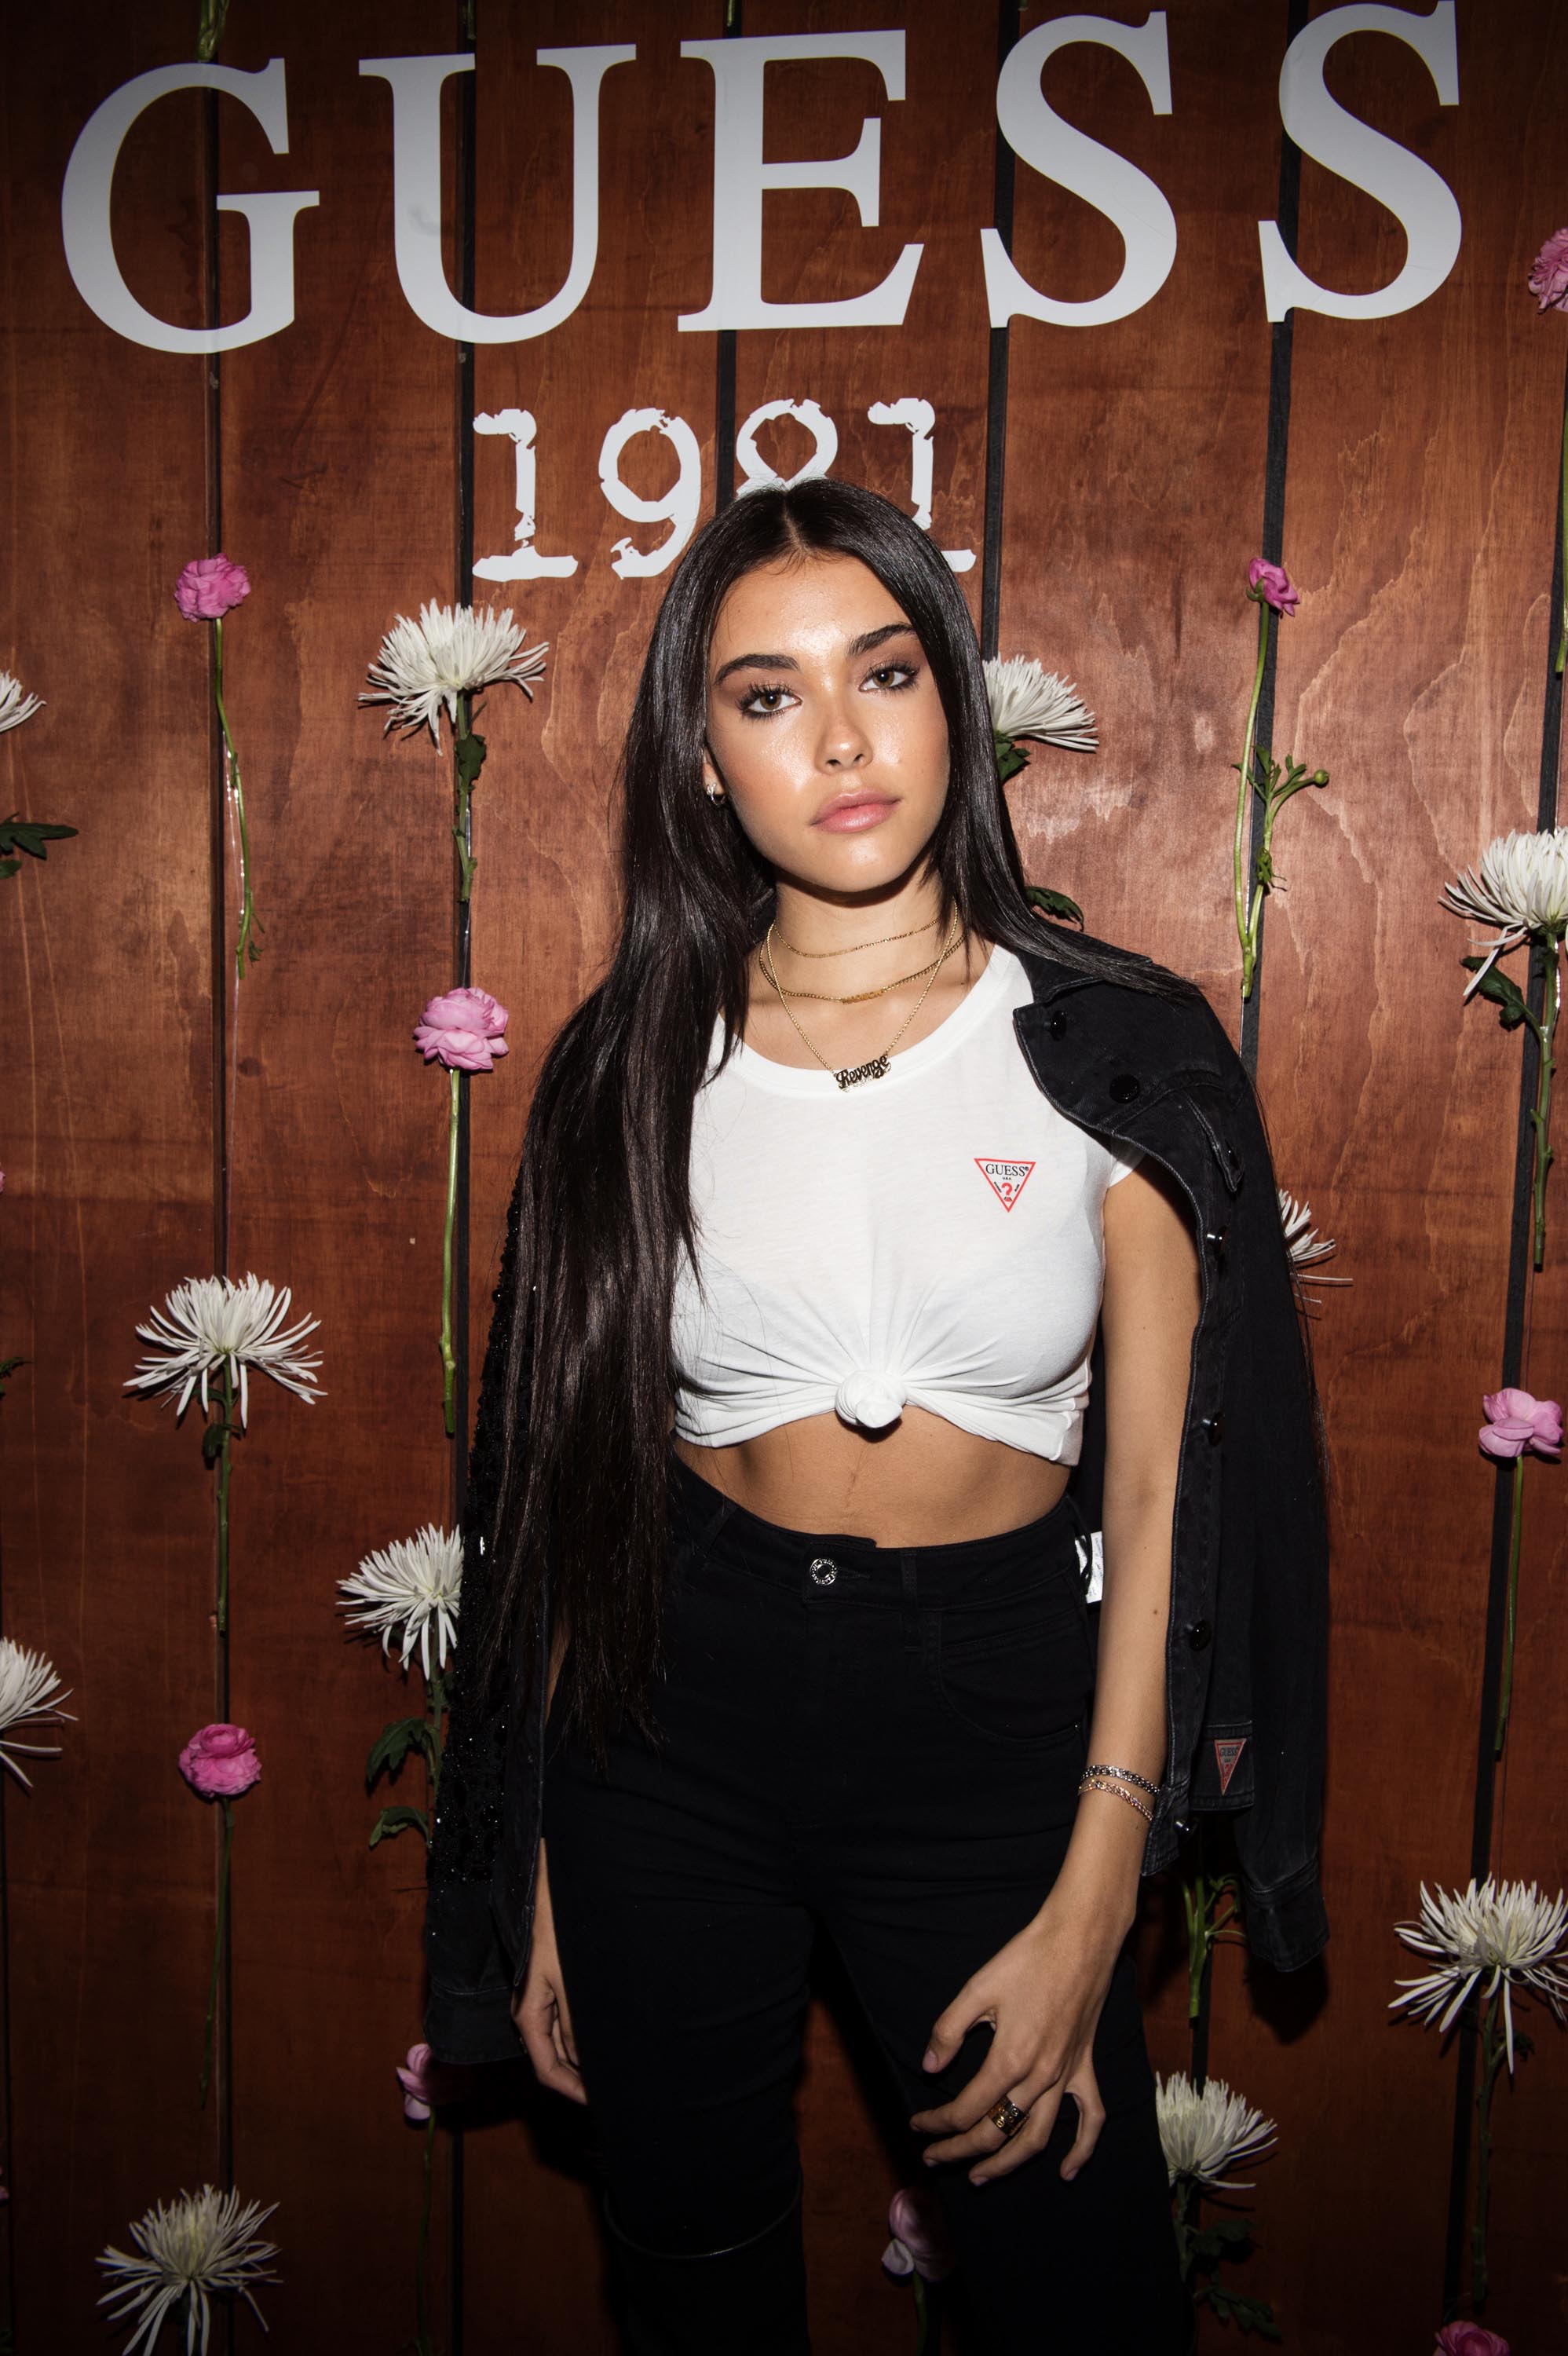 Madison Beer attends GUESS 1981 Fragrance Launch